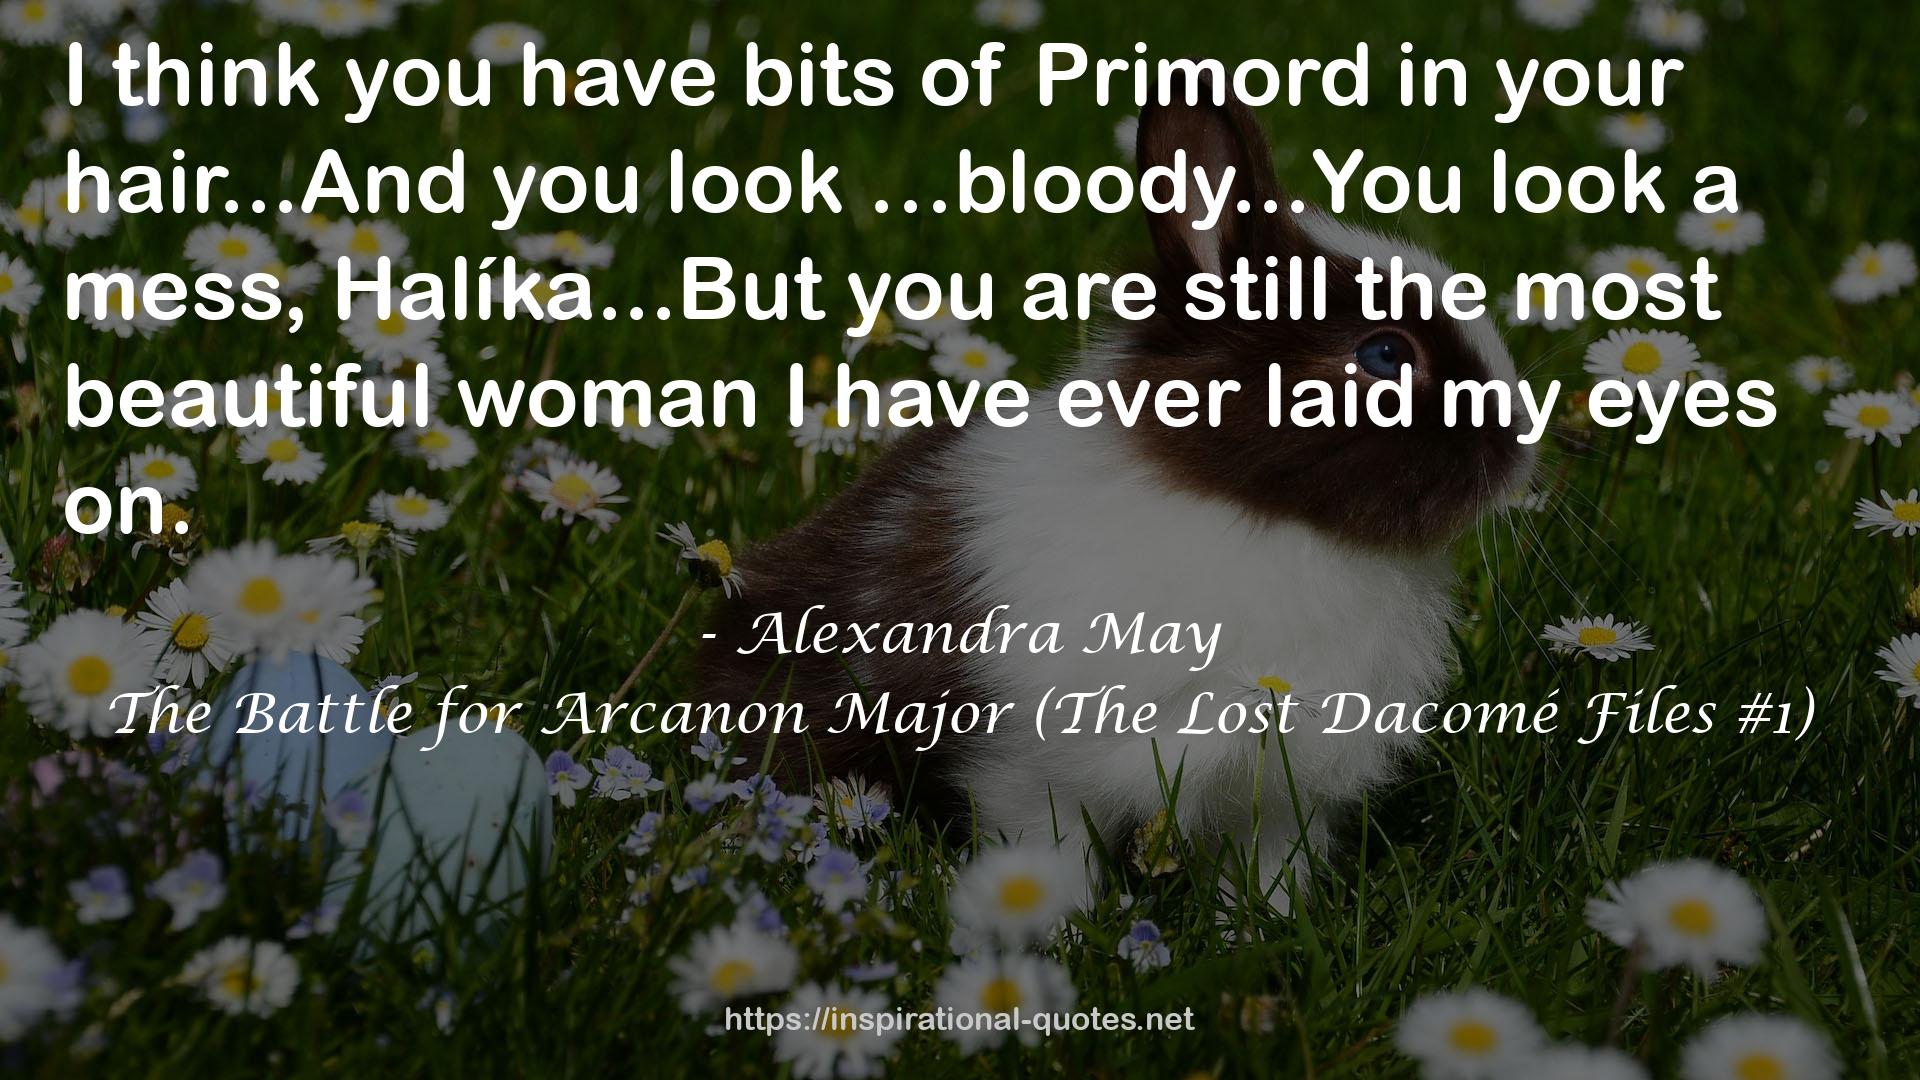 The Battle for Arcanon Major (The Lost Dacomé Files #1) QUOTES